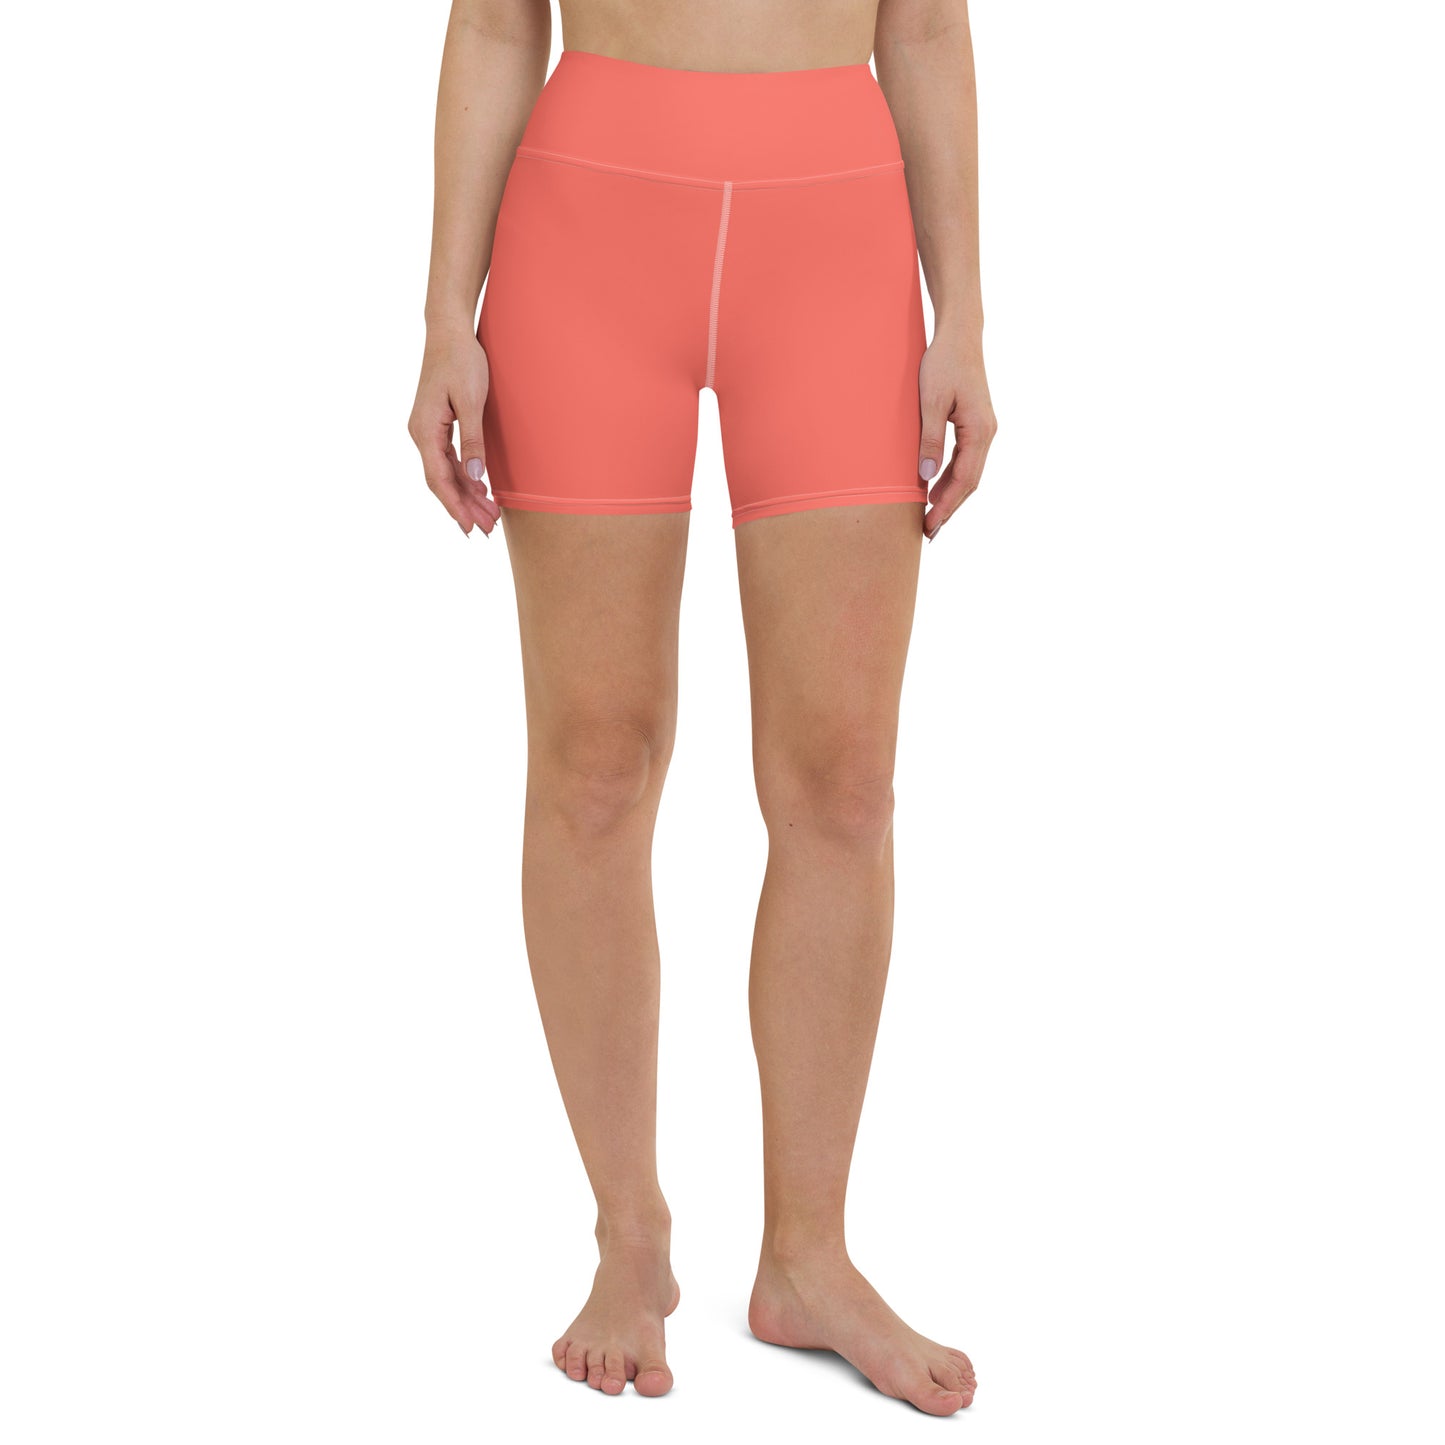 Coralo Solid Coral High Waist Yoga Shorts / Bike Shorts with Inside Pocket